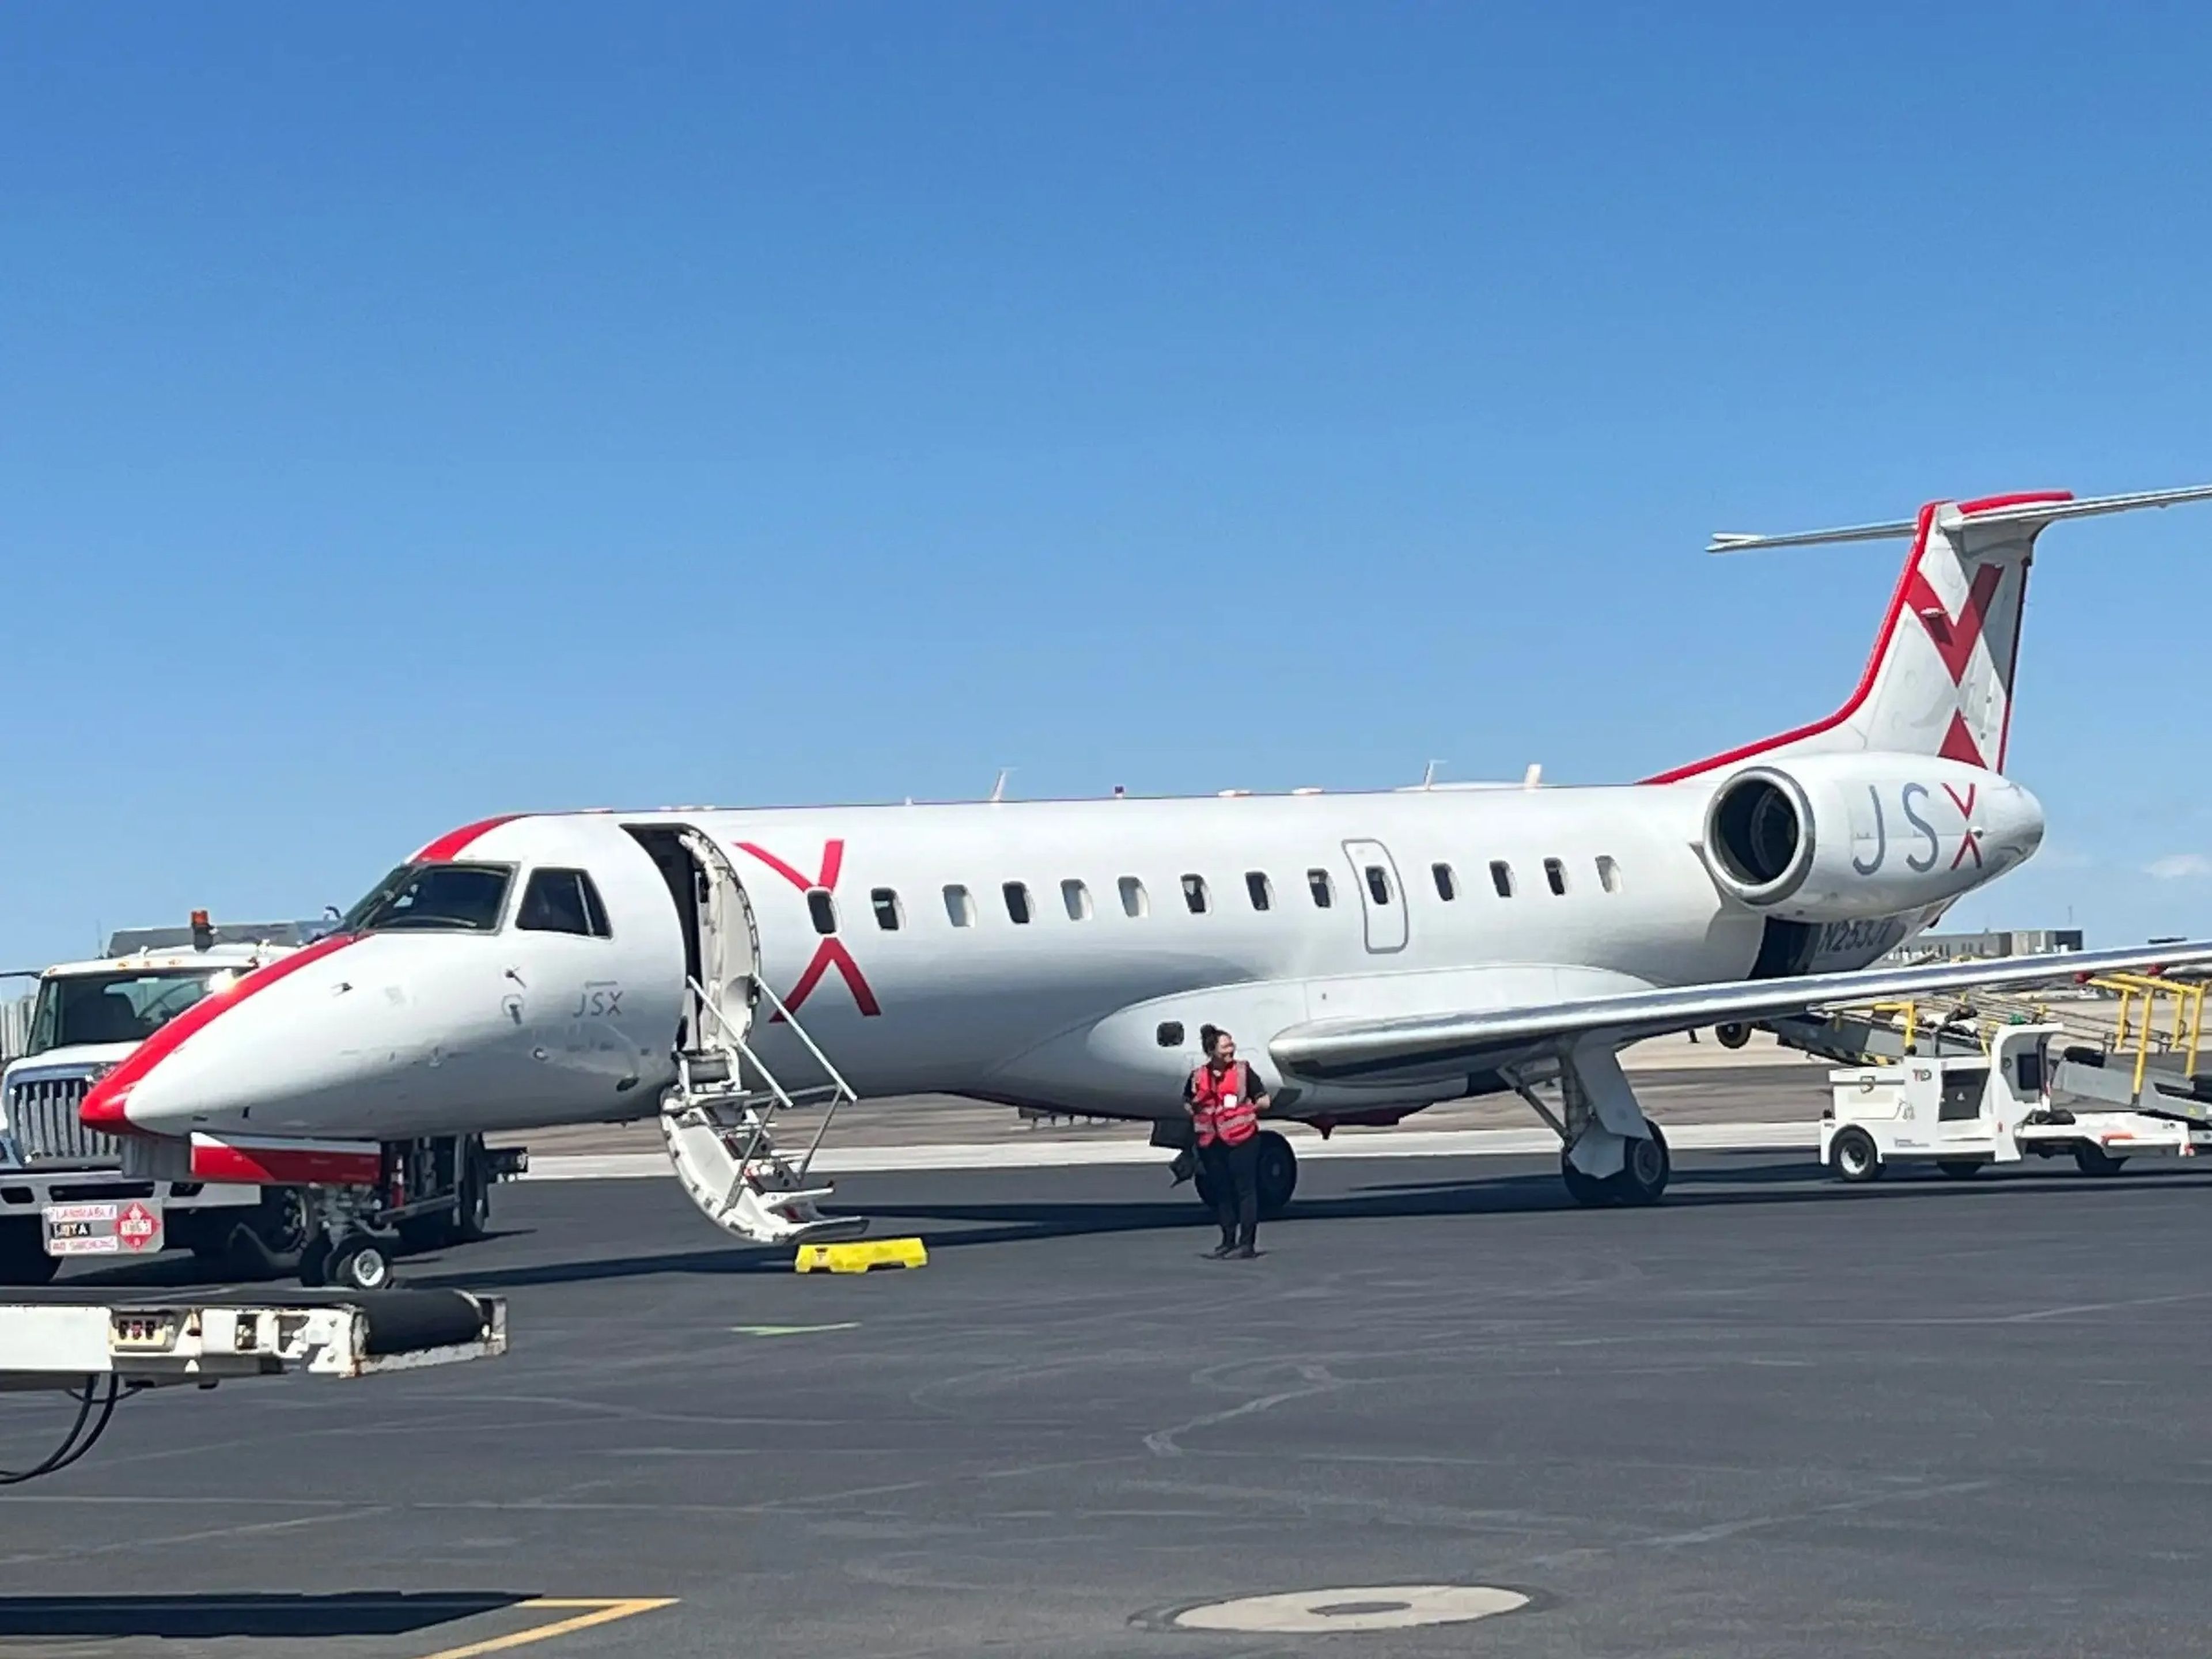 The JSX plane on a runway in Phoenix after the author and other passengers had deplaned.